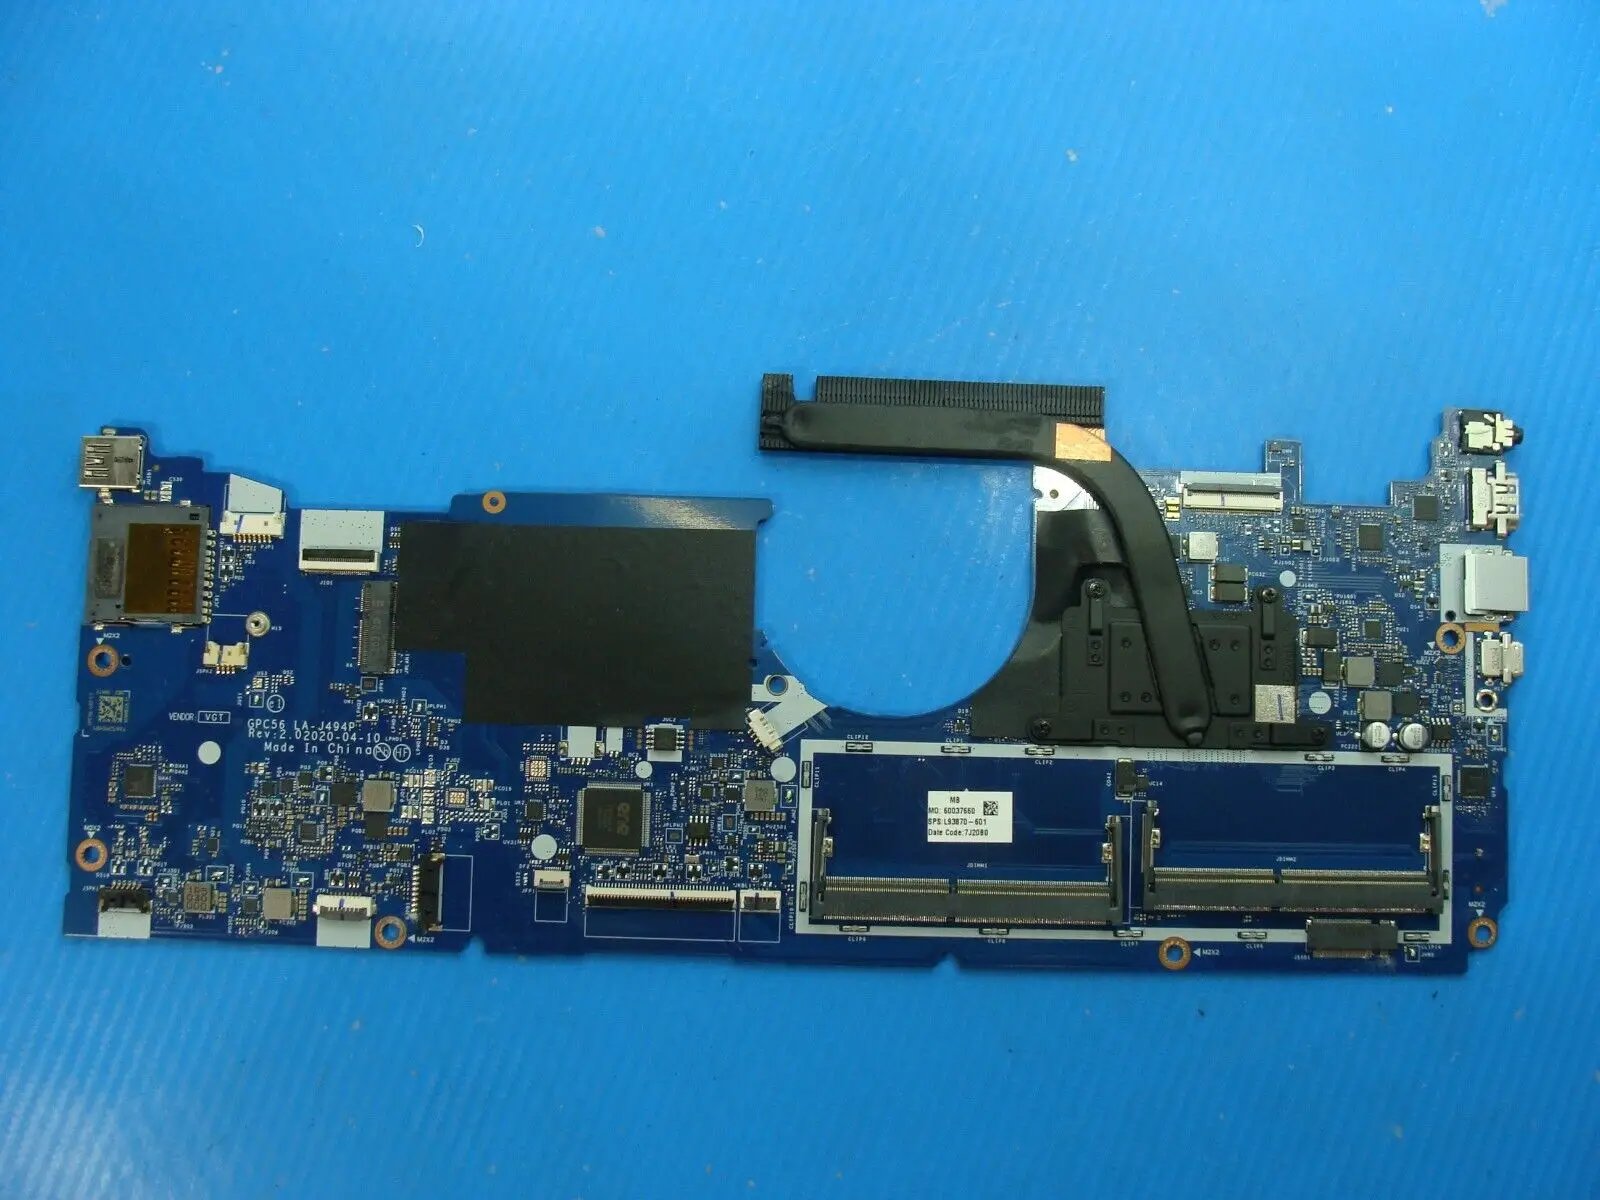 HP Envy x360 15.6” 15m-ed0023dx i7-1065G7 1.3GHz Motherboard L93870-601 AS IS